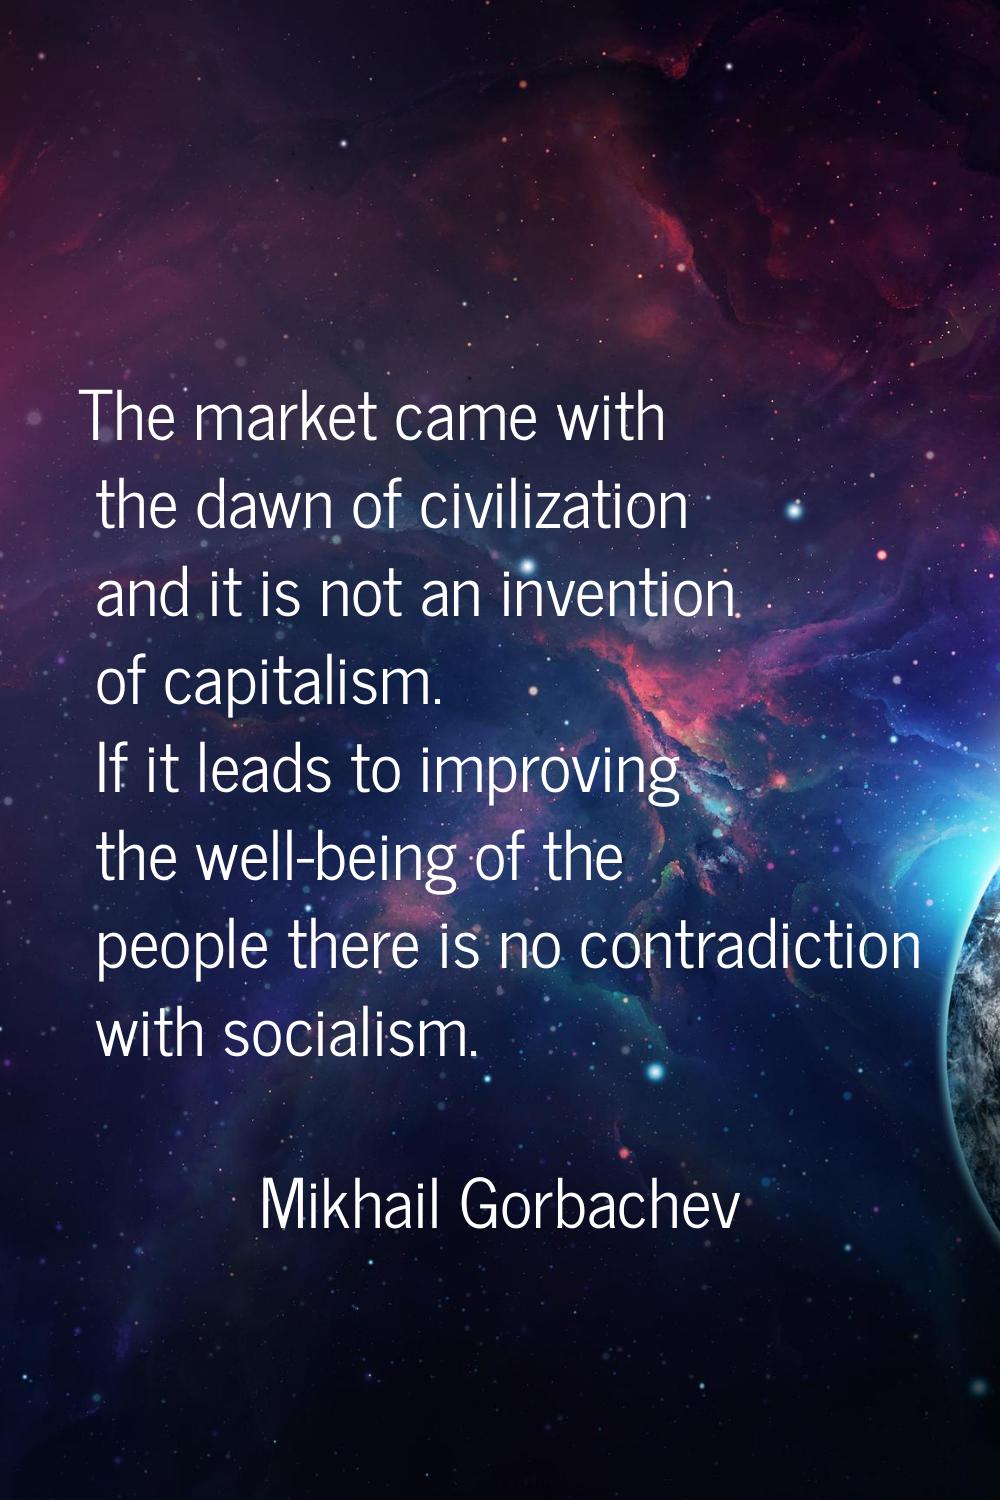 The market came with the dawn of civilization and it is not an invention of capitalism. If it leads